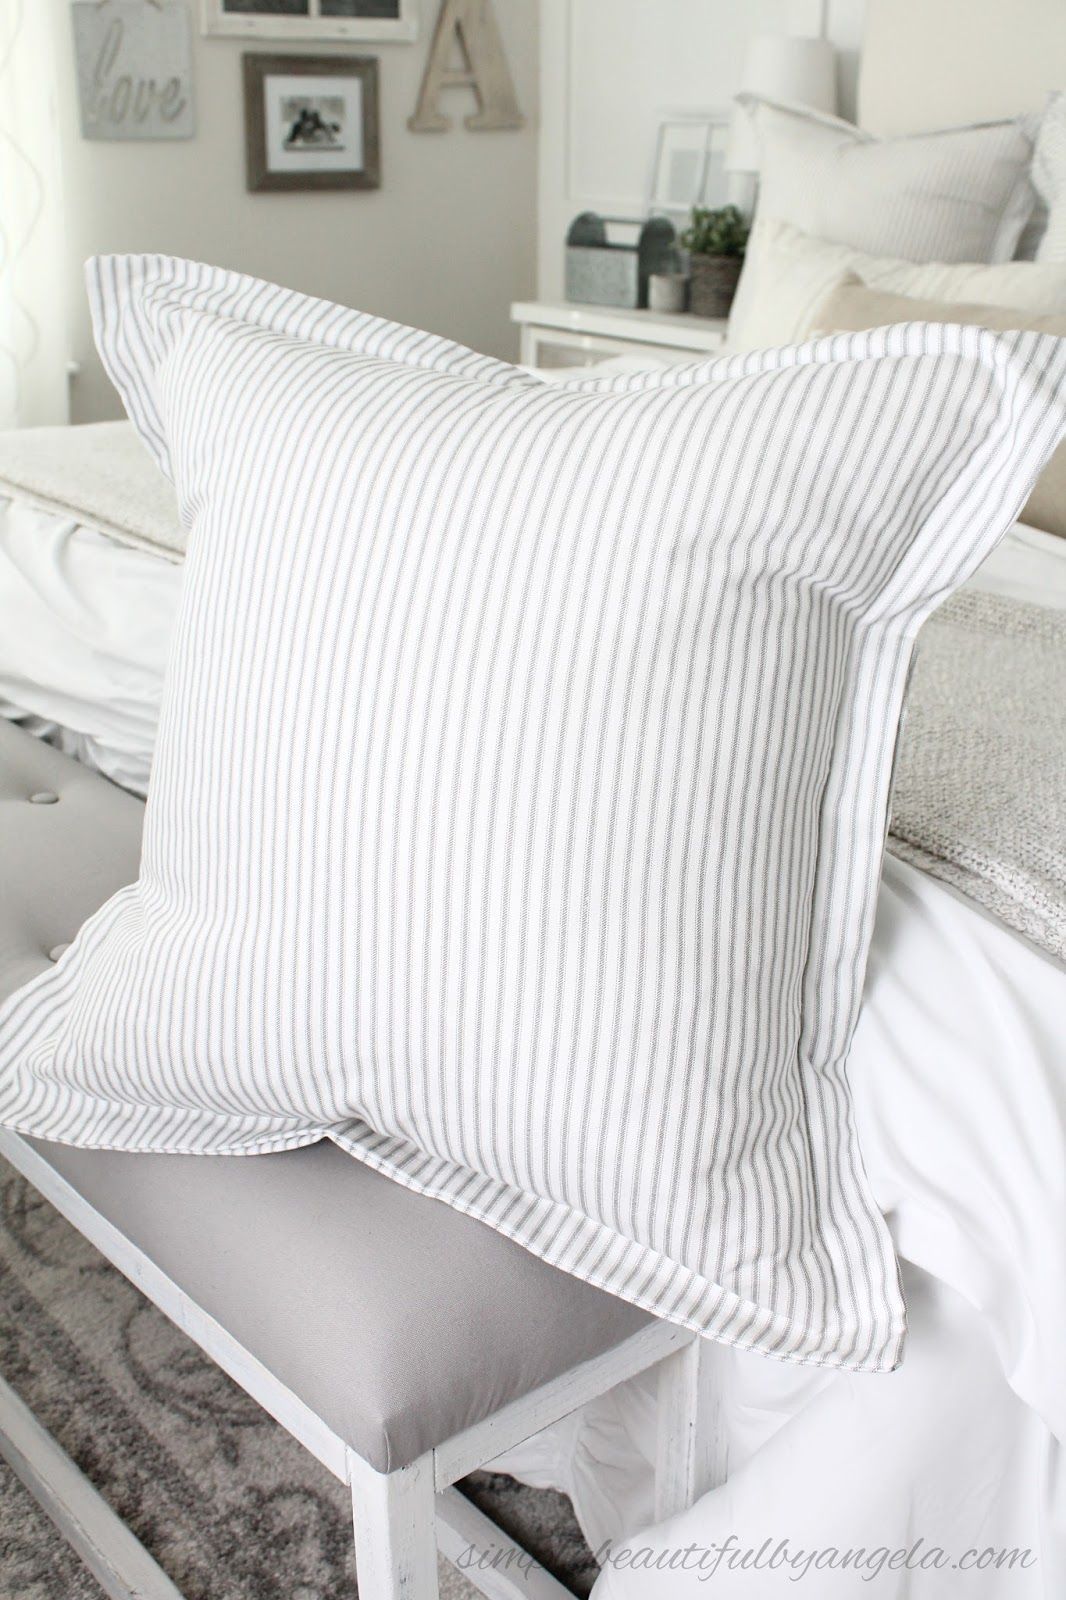 DIY Euro Pillows with Flanges | Simply Beautiful By Angela - DIY Euro Pillows with Flanges | Simply Beautiful By Angela -   16 diy Pillows rustic ideas